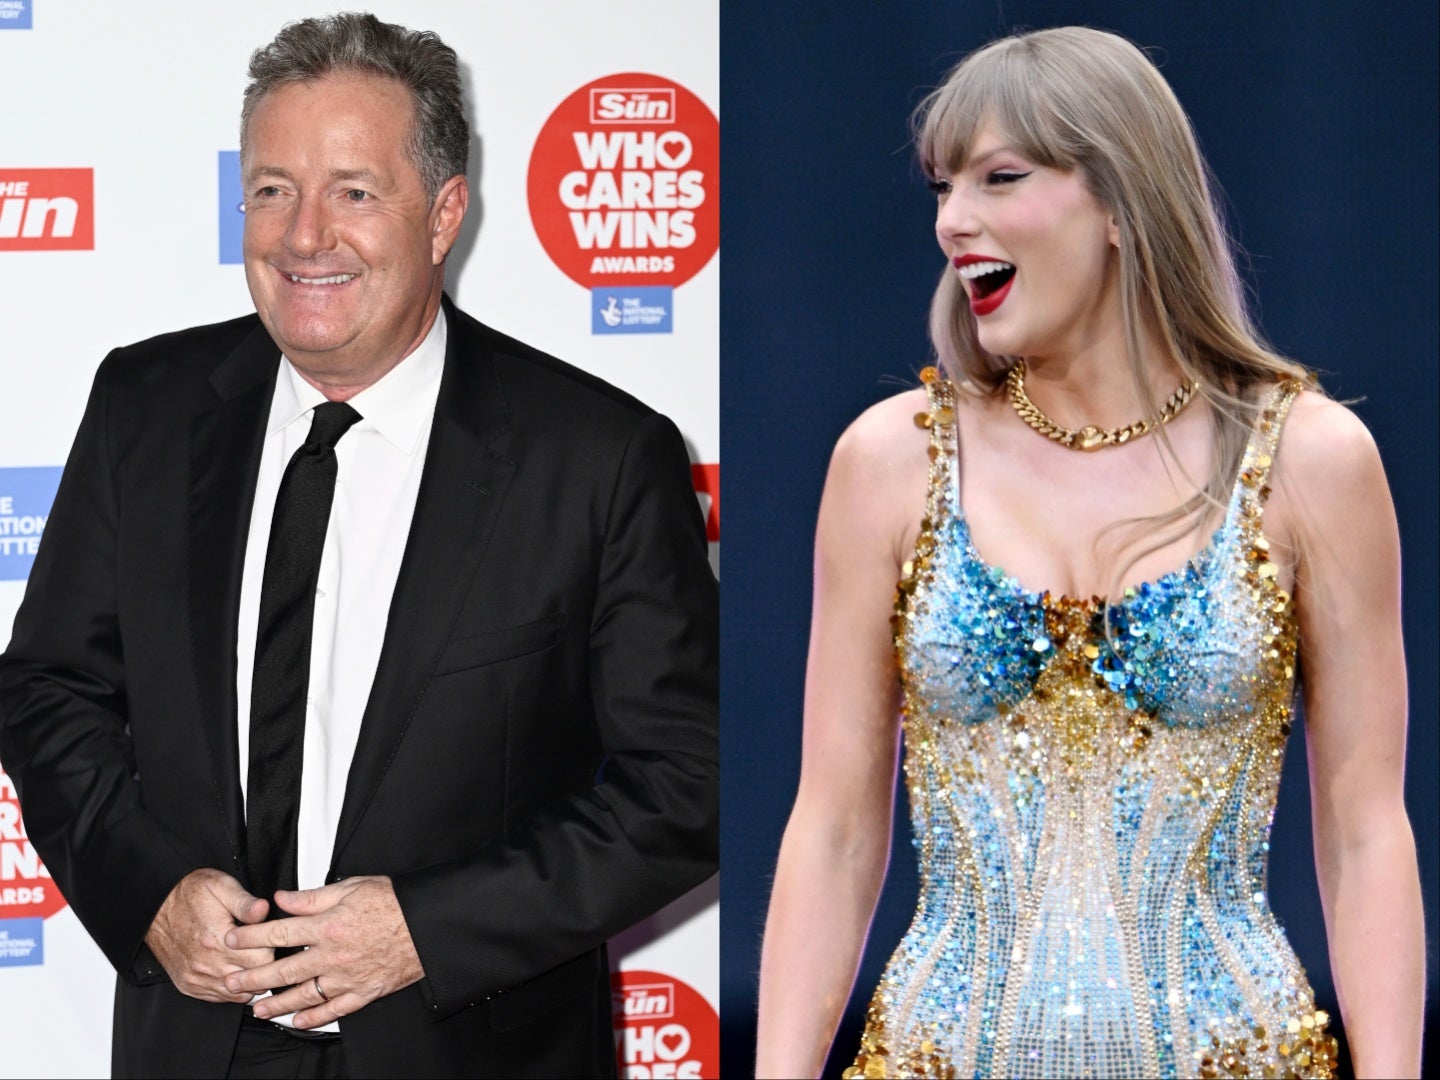 ‘I’ve seen better singers and musicians than Taylor Swift in my time, but she has something that blows other stars away,’ Piers wrote